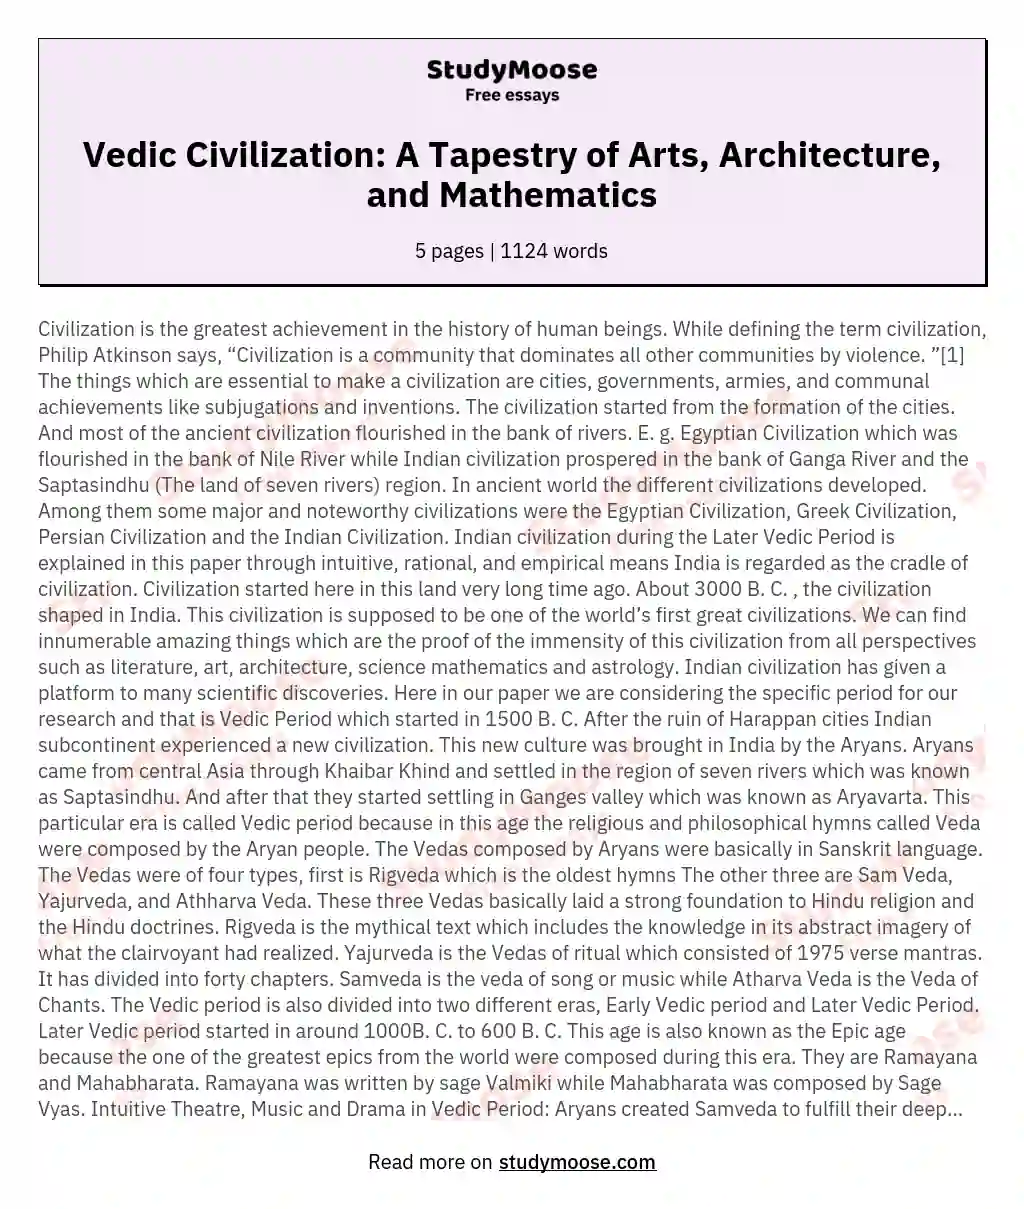 Vedic Civilization: A Tapestry of Arts, Architecture, and Mathematics essay